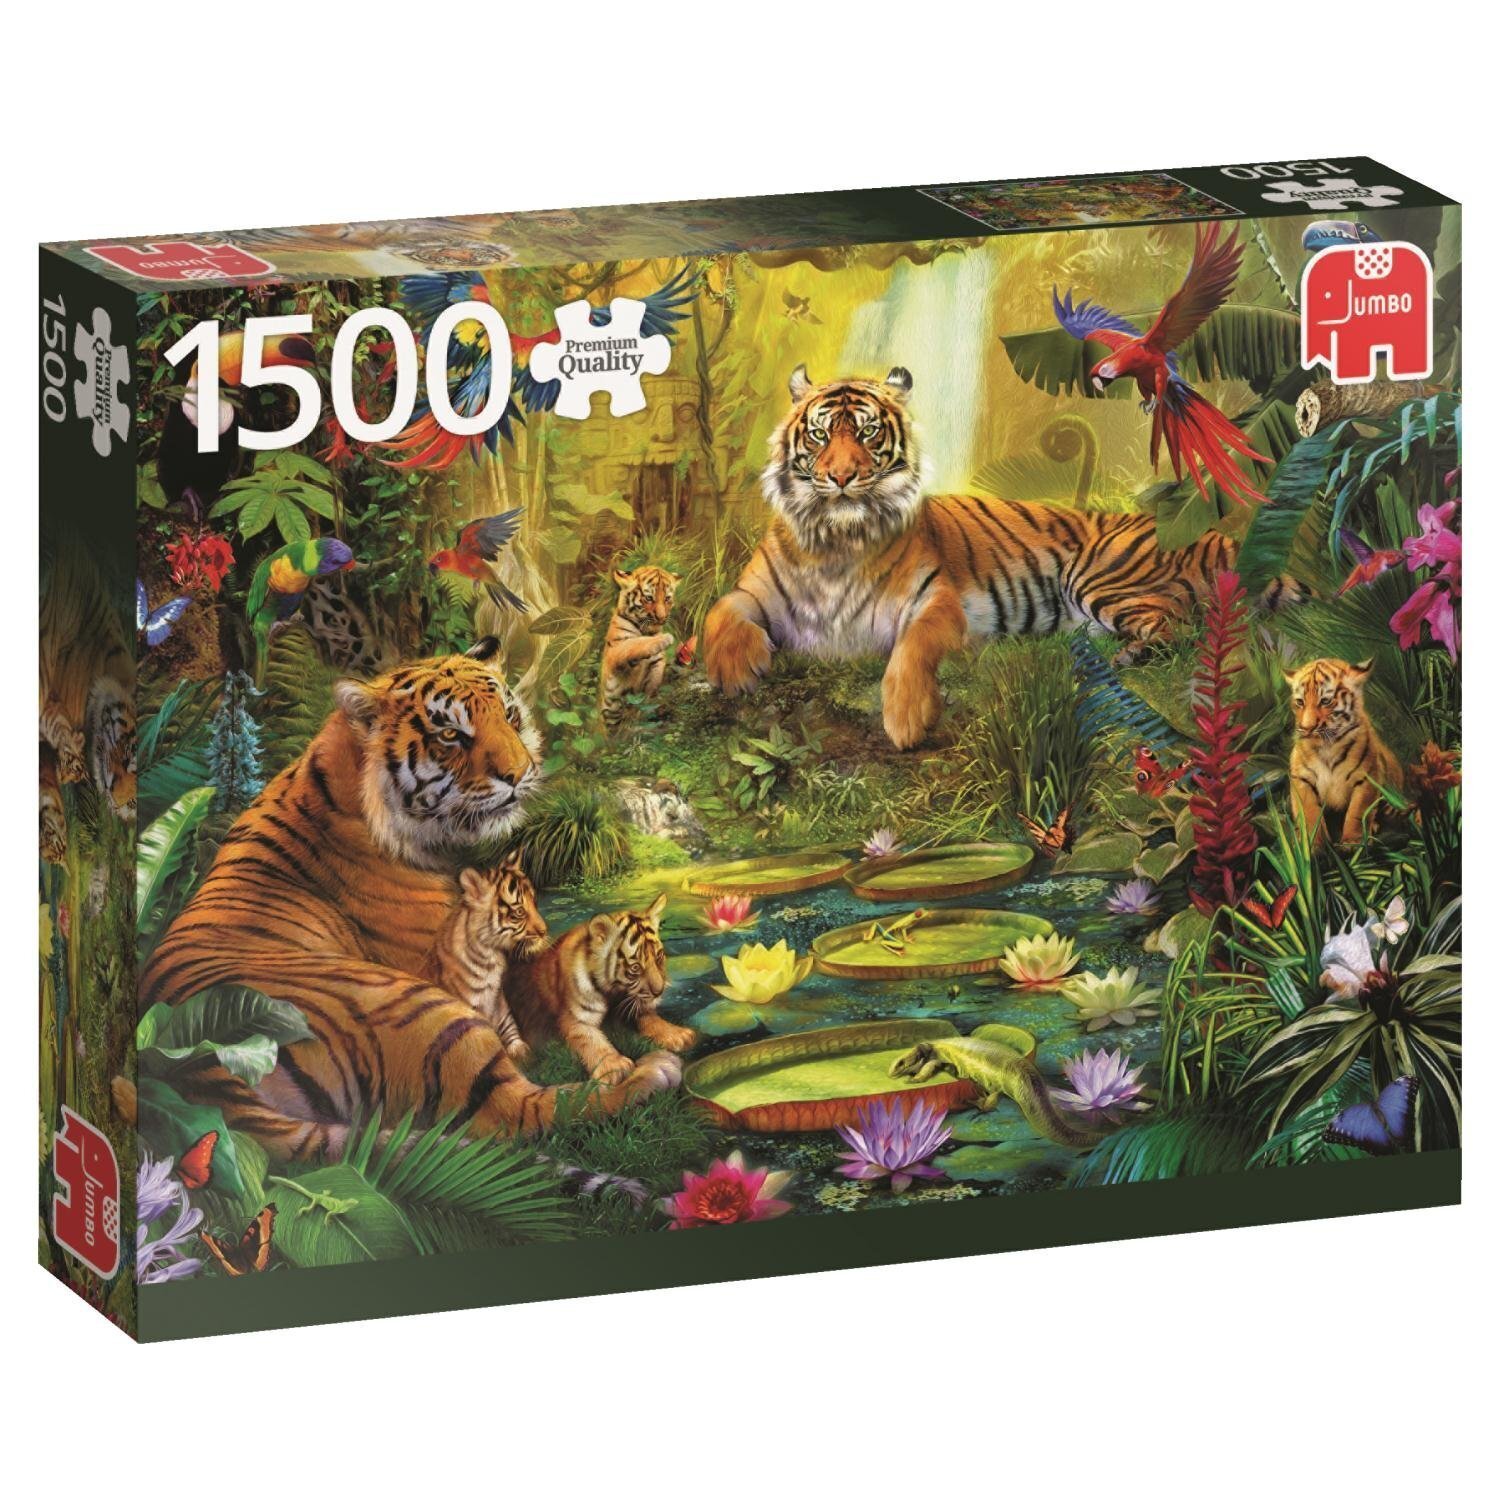 Buy Jumbo - Tigers in the Jungle Puzzle 1500pc